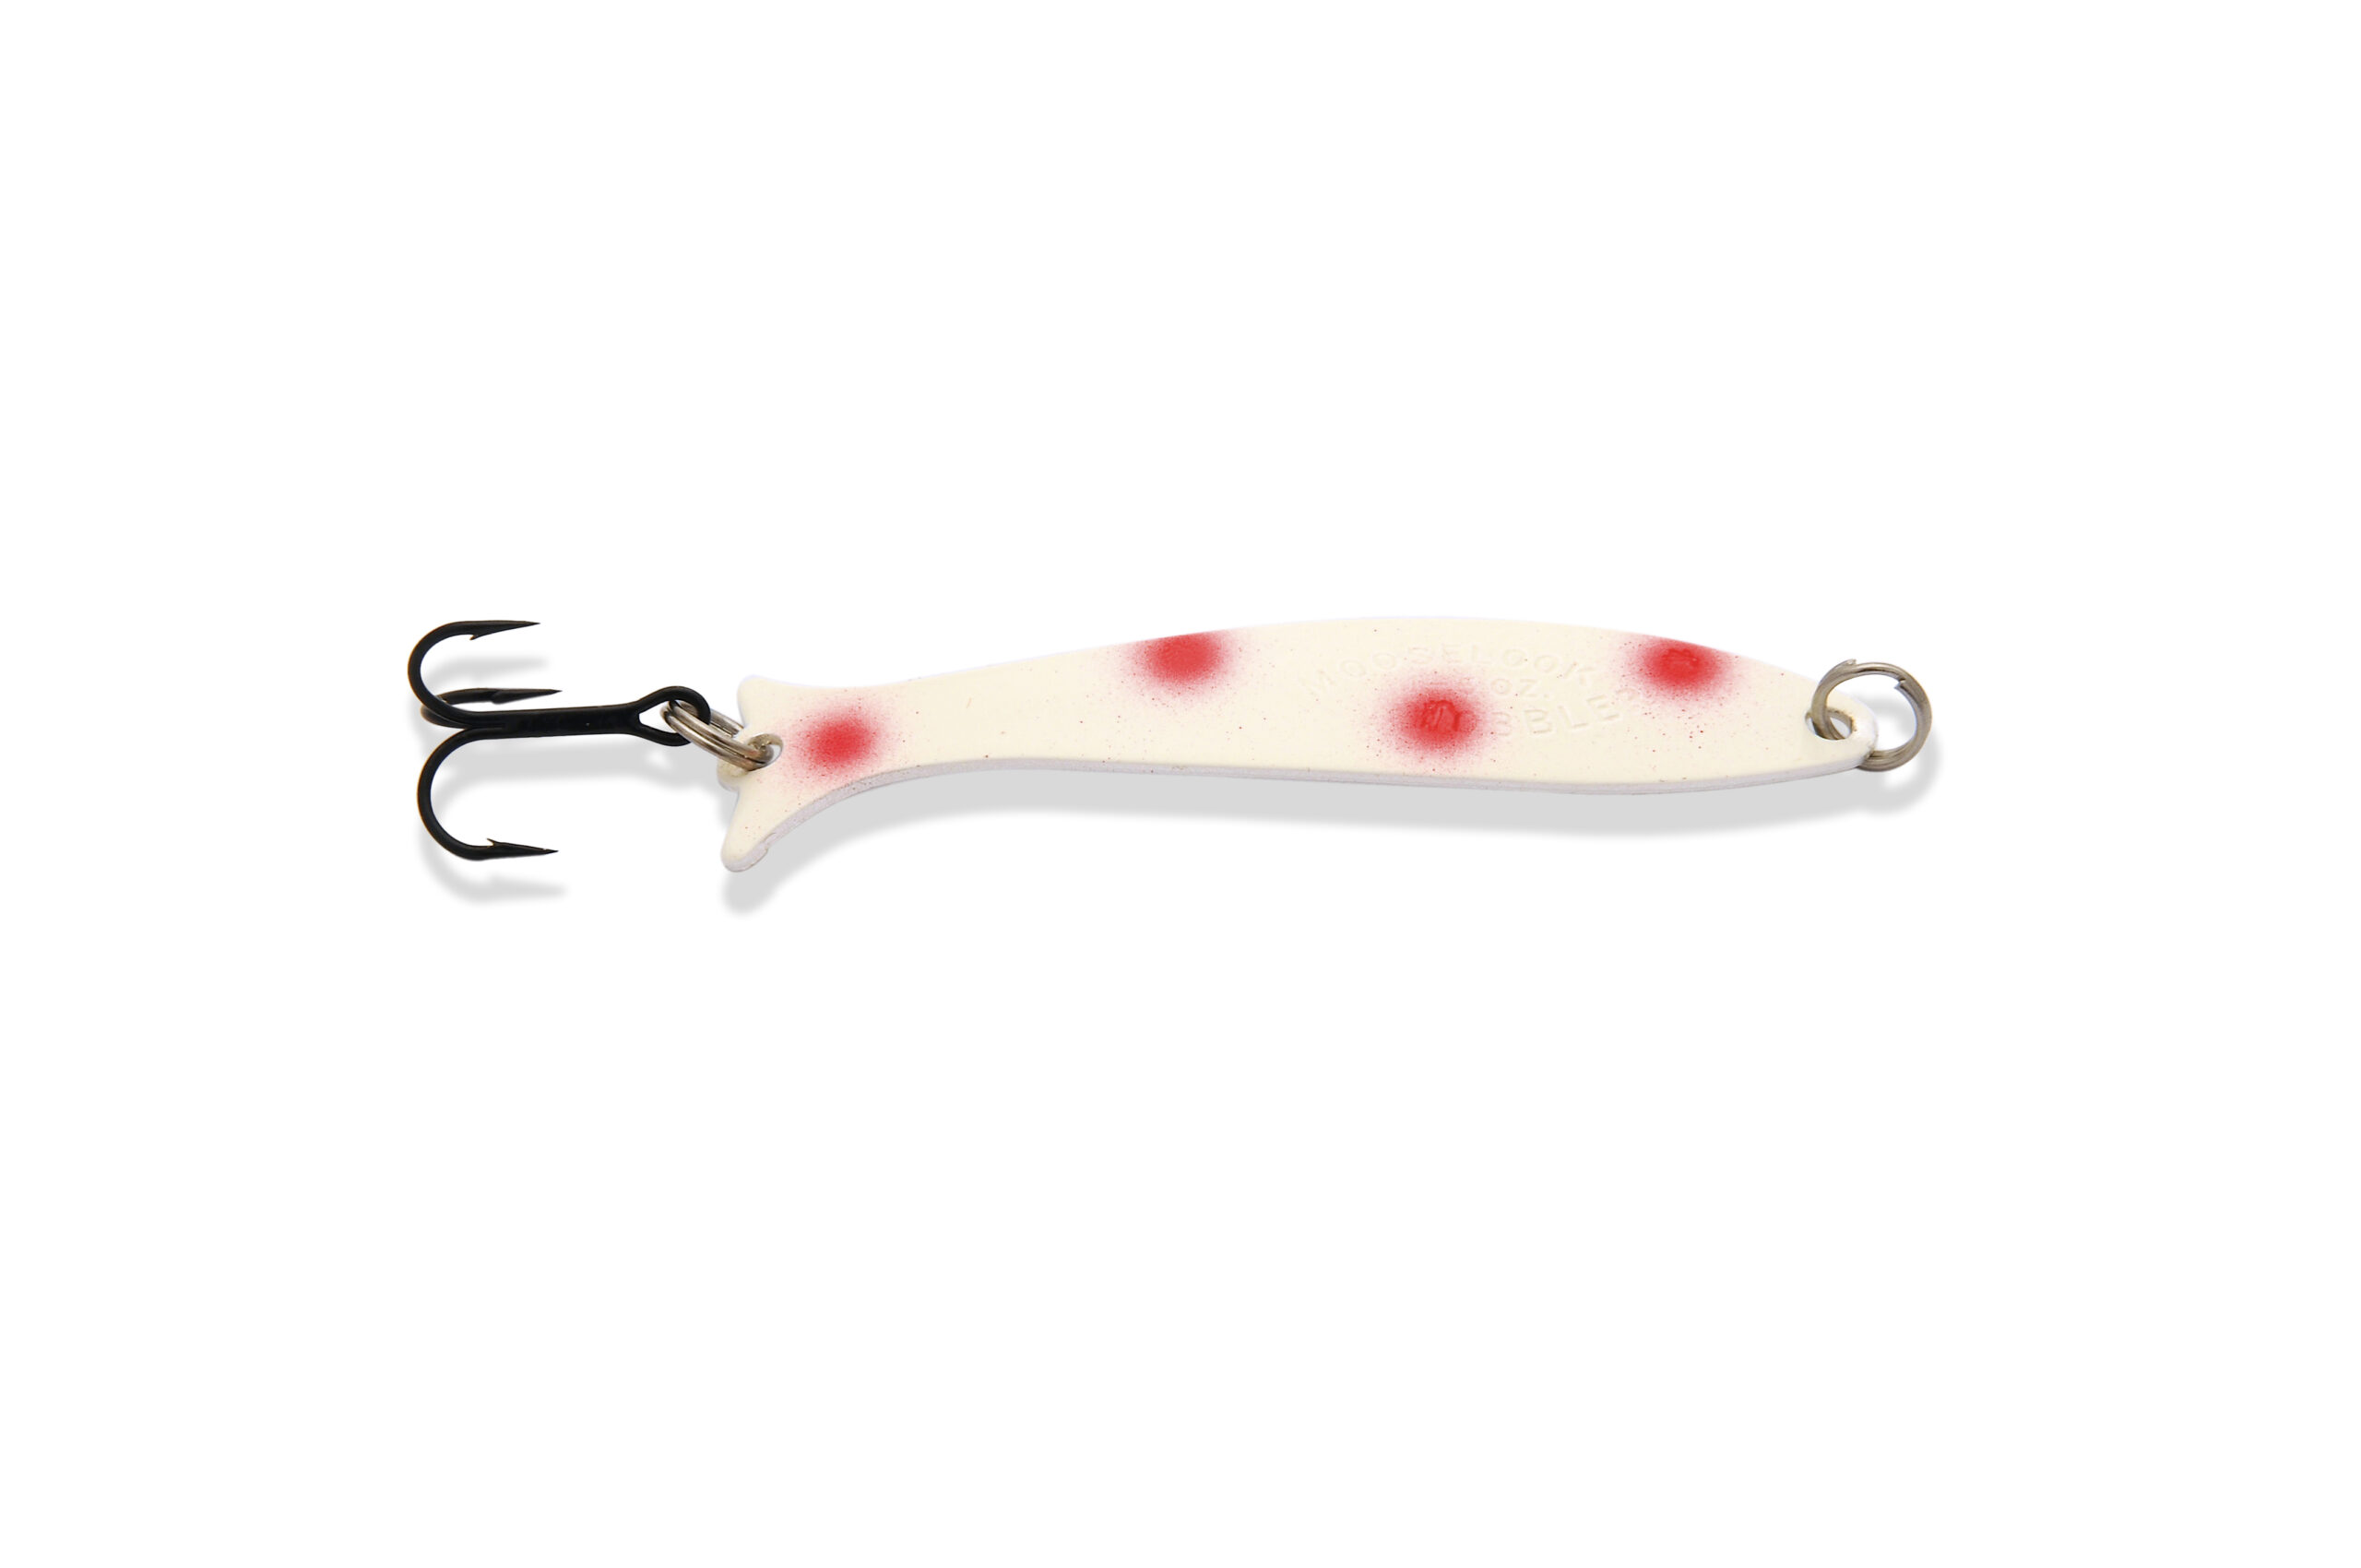 Mooselook Wobbler - Thinfish Trout 4-Pack Kit - MWTF by Brecks